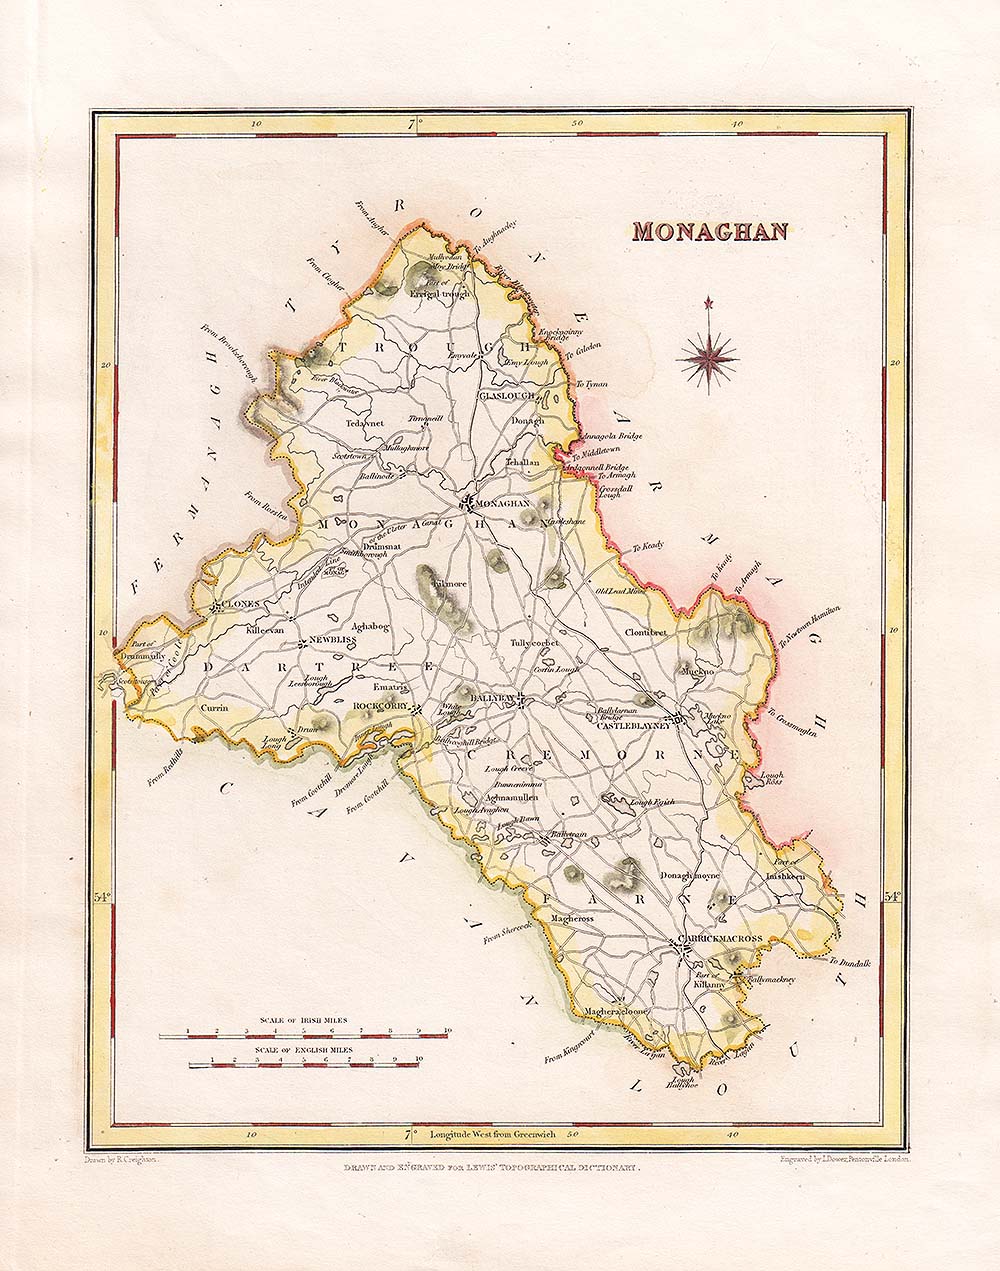 Monaghan  -  Lewis Atlas comprising the Counties of Ireland